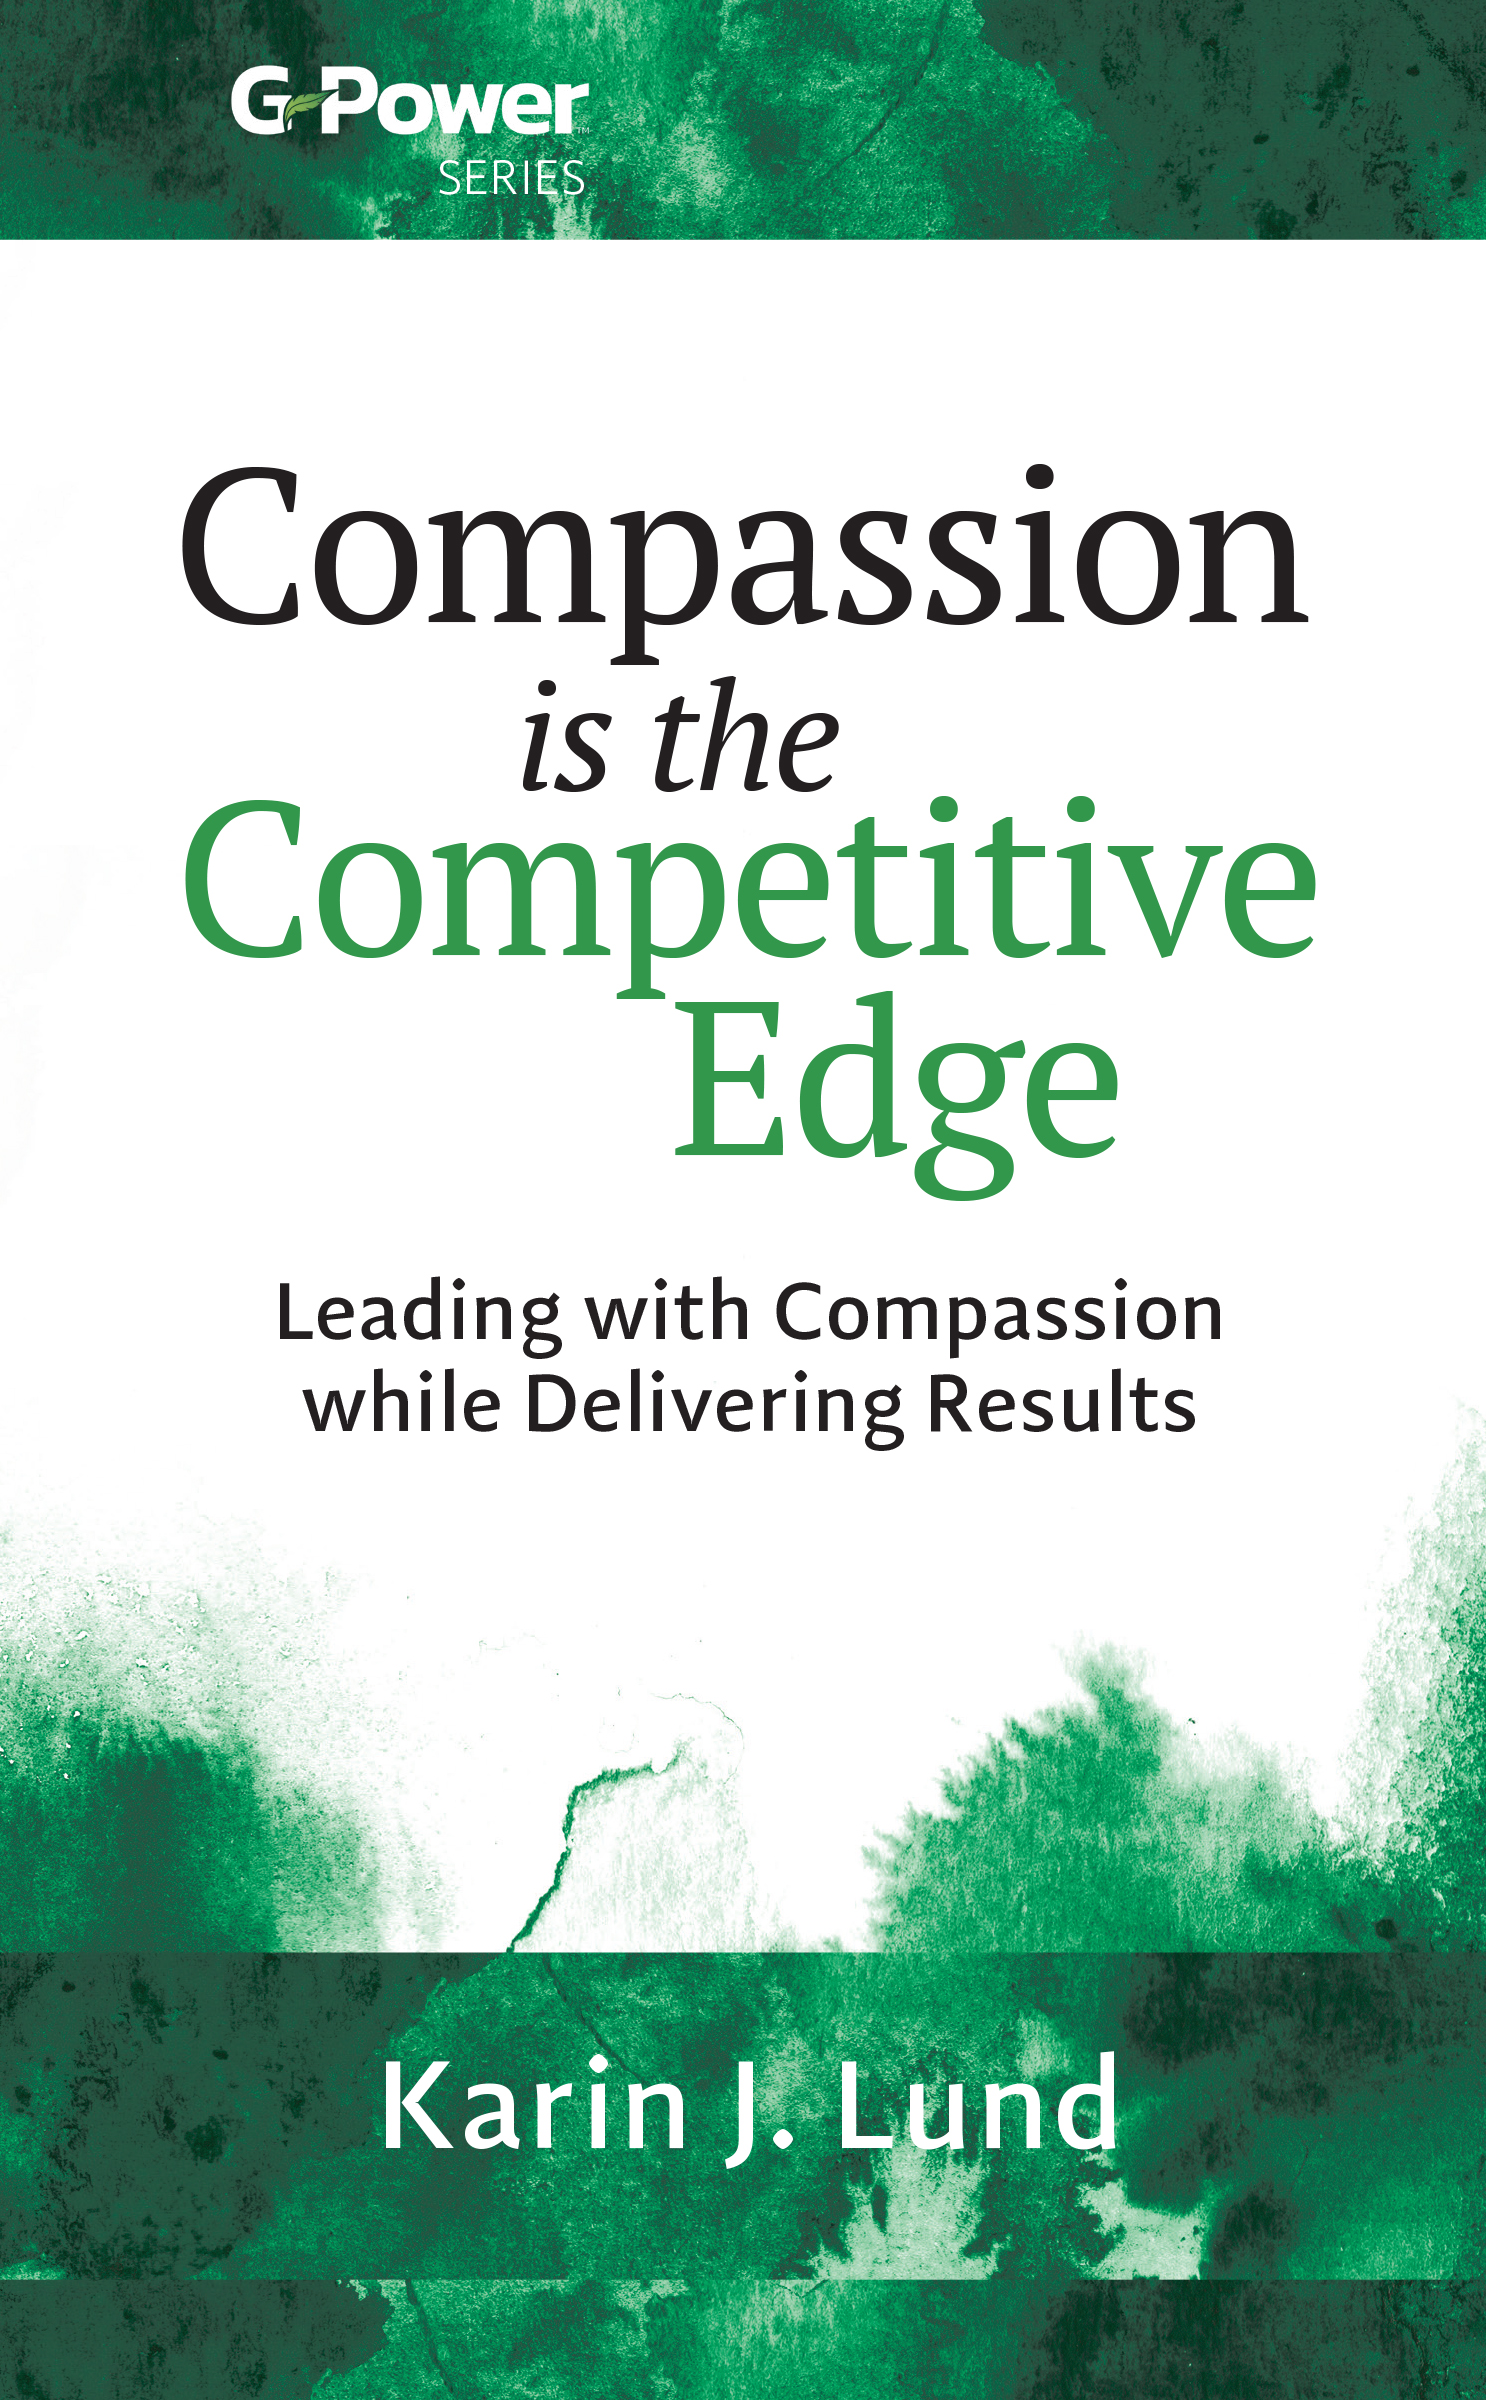 Compassion is the Competitive Edge book cover